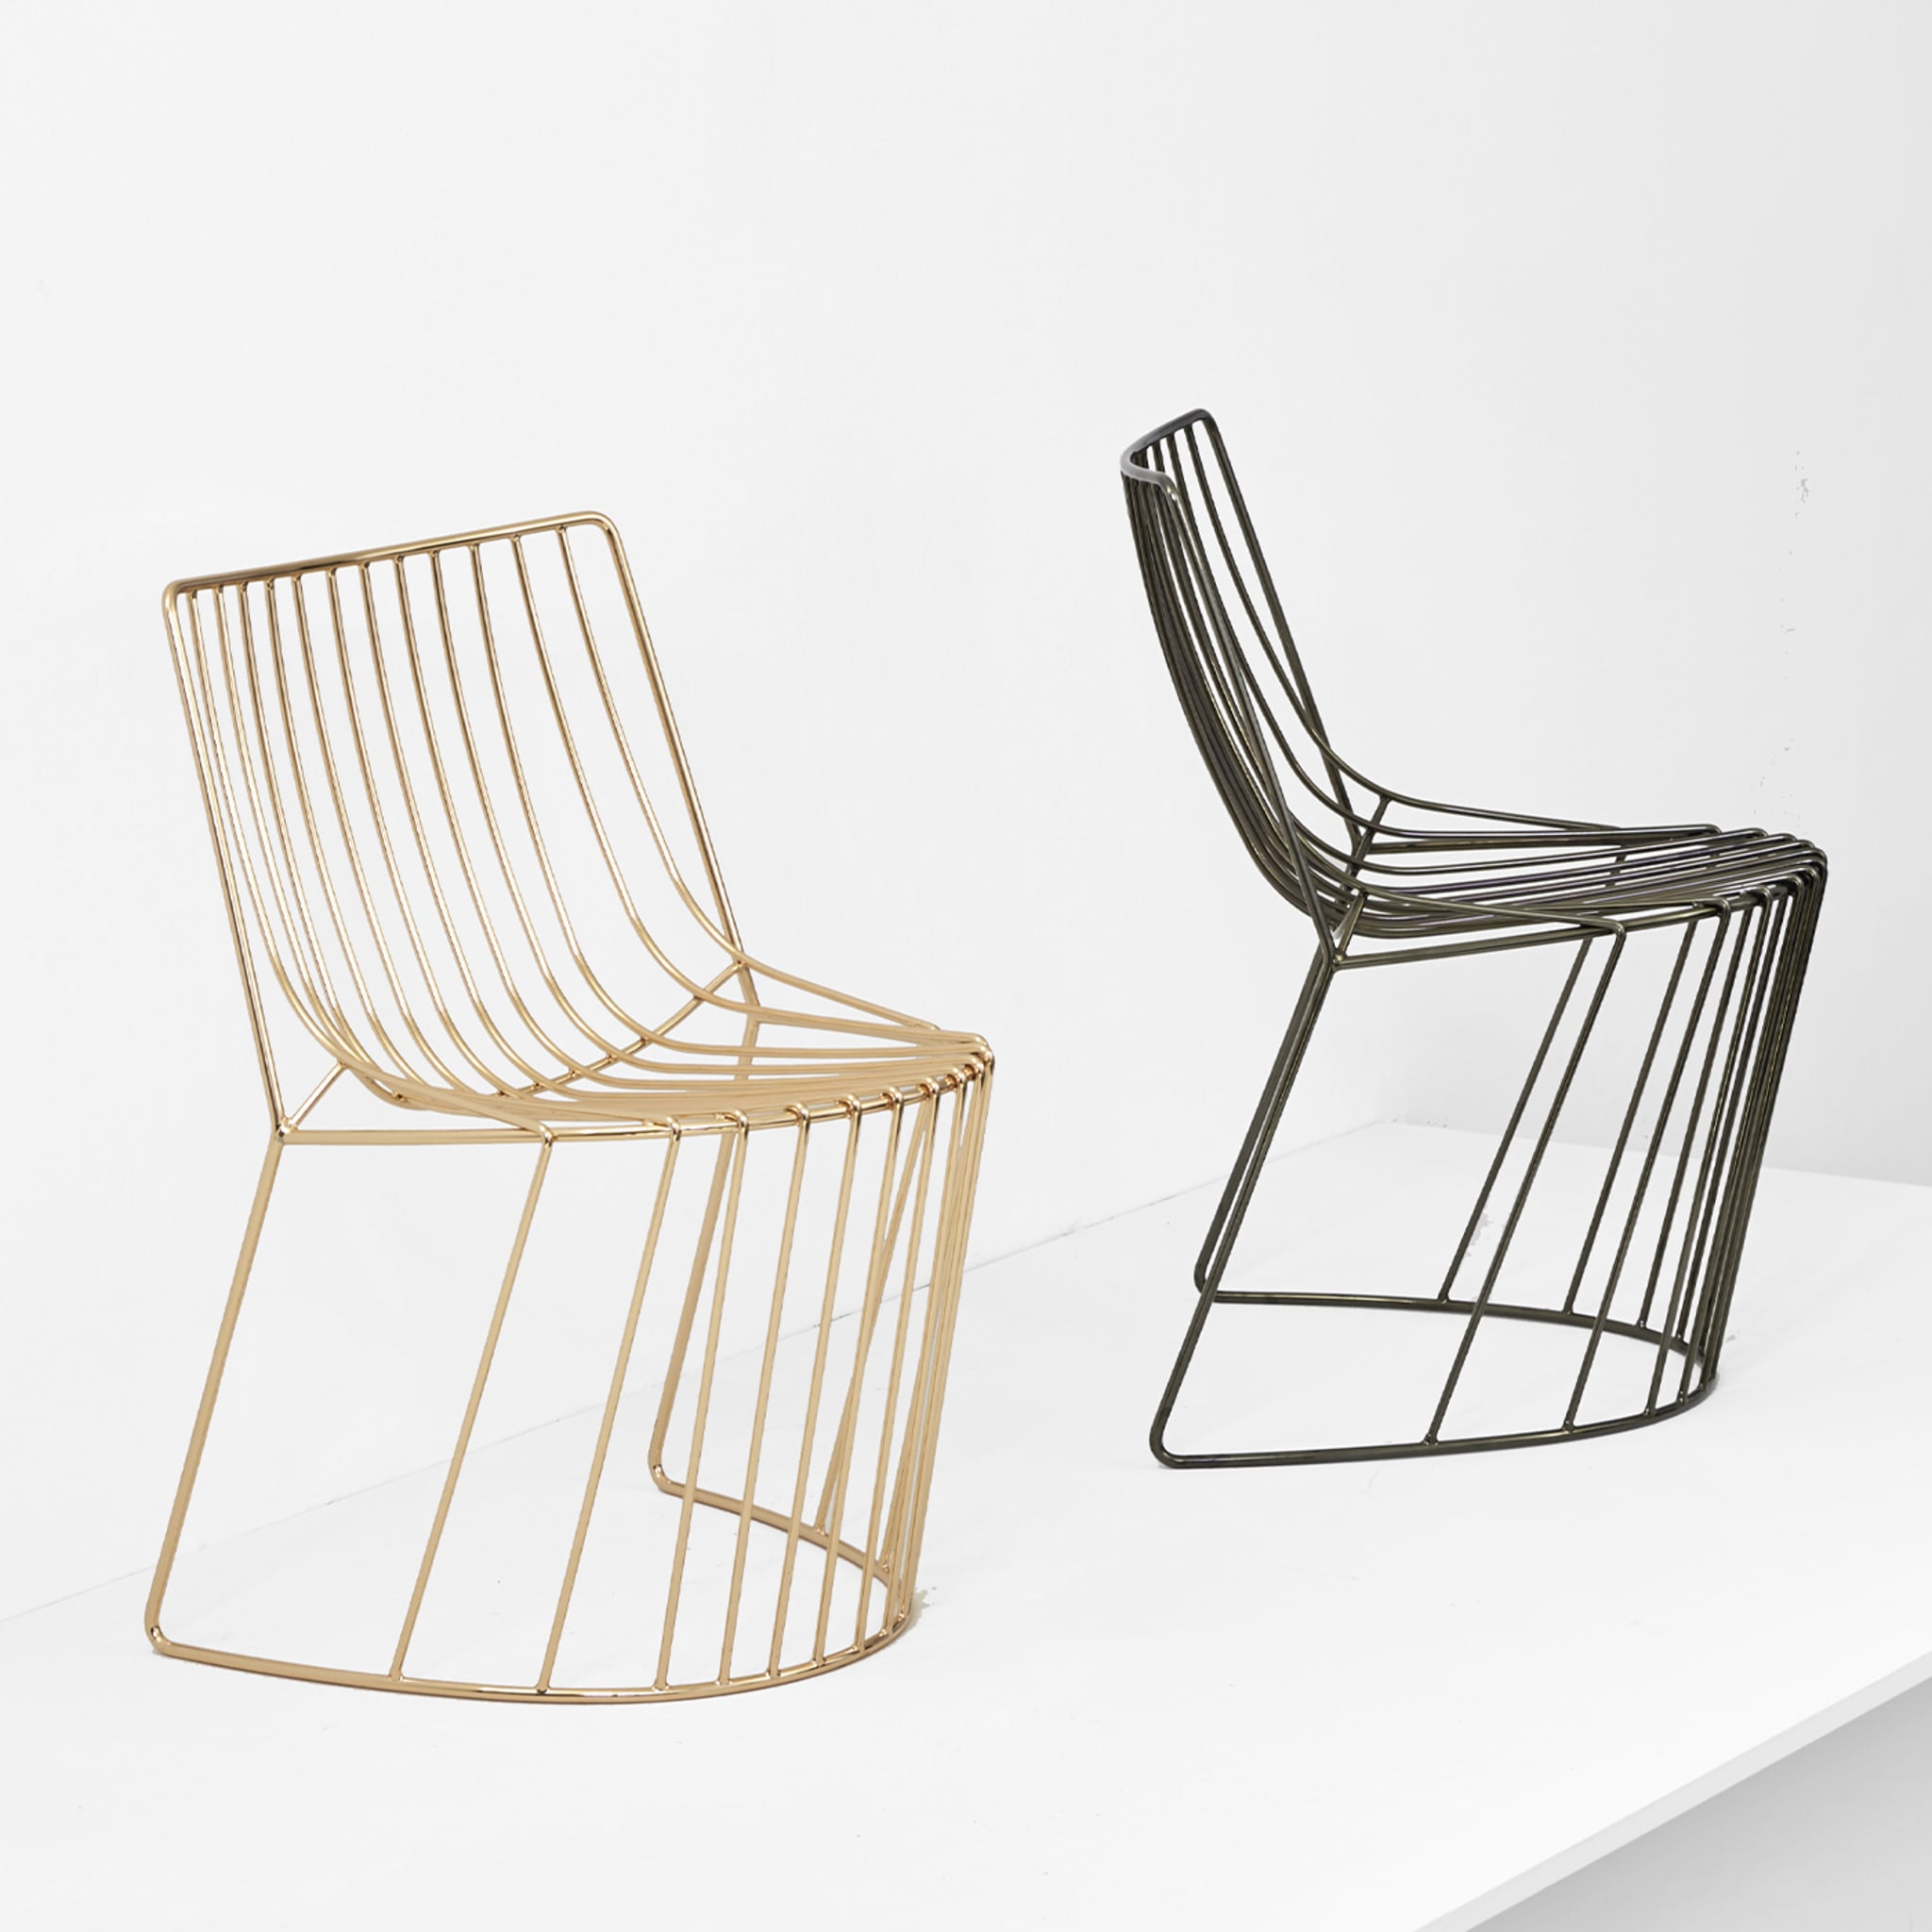 AMARONE LIGHT GOLD POLISHED CHAIR - Alternative view 3